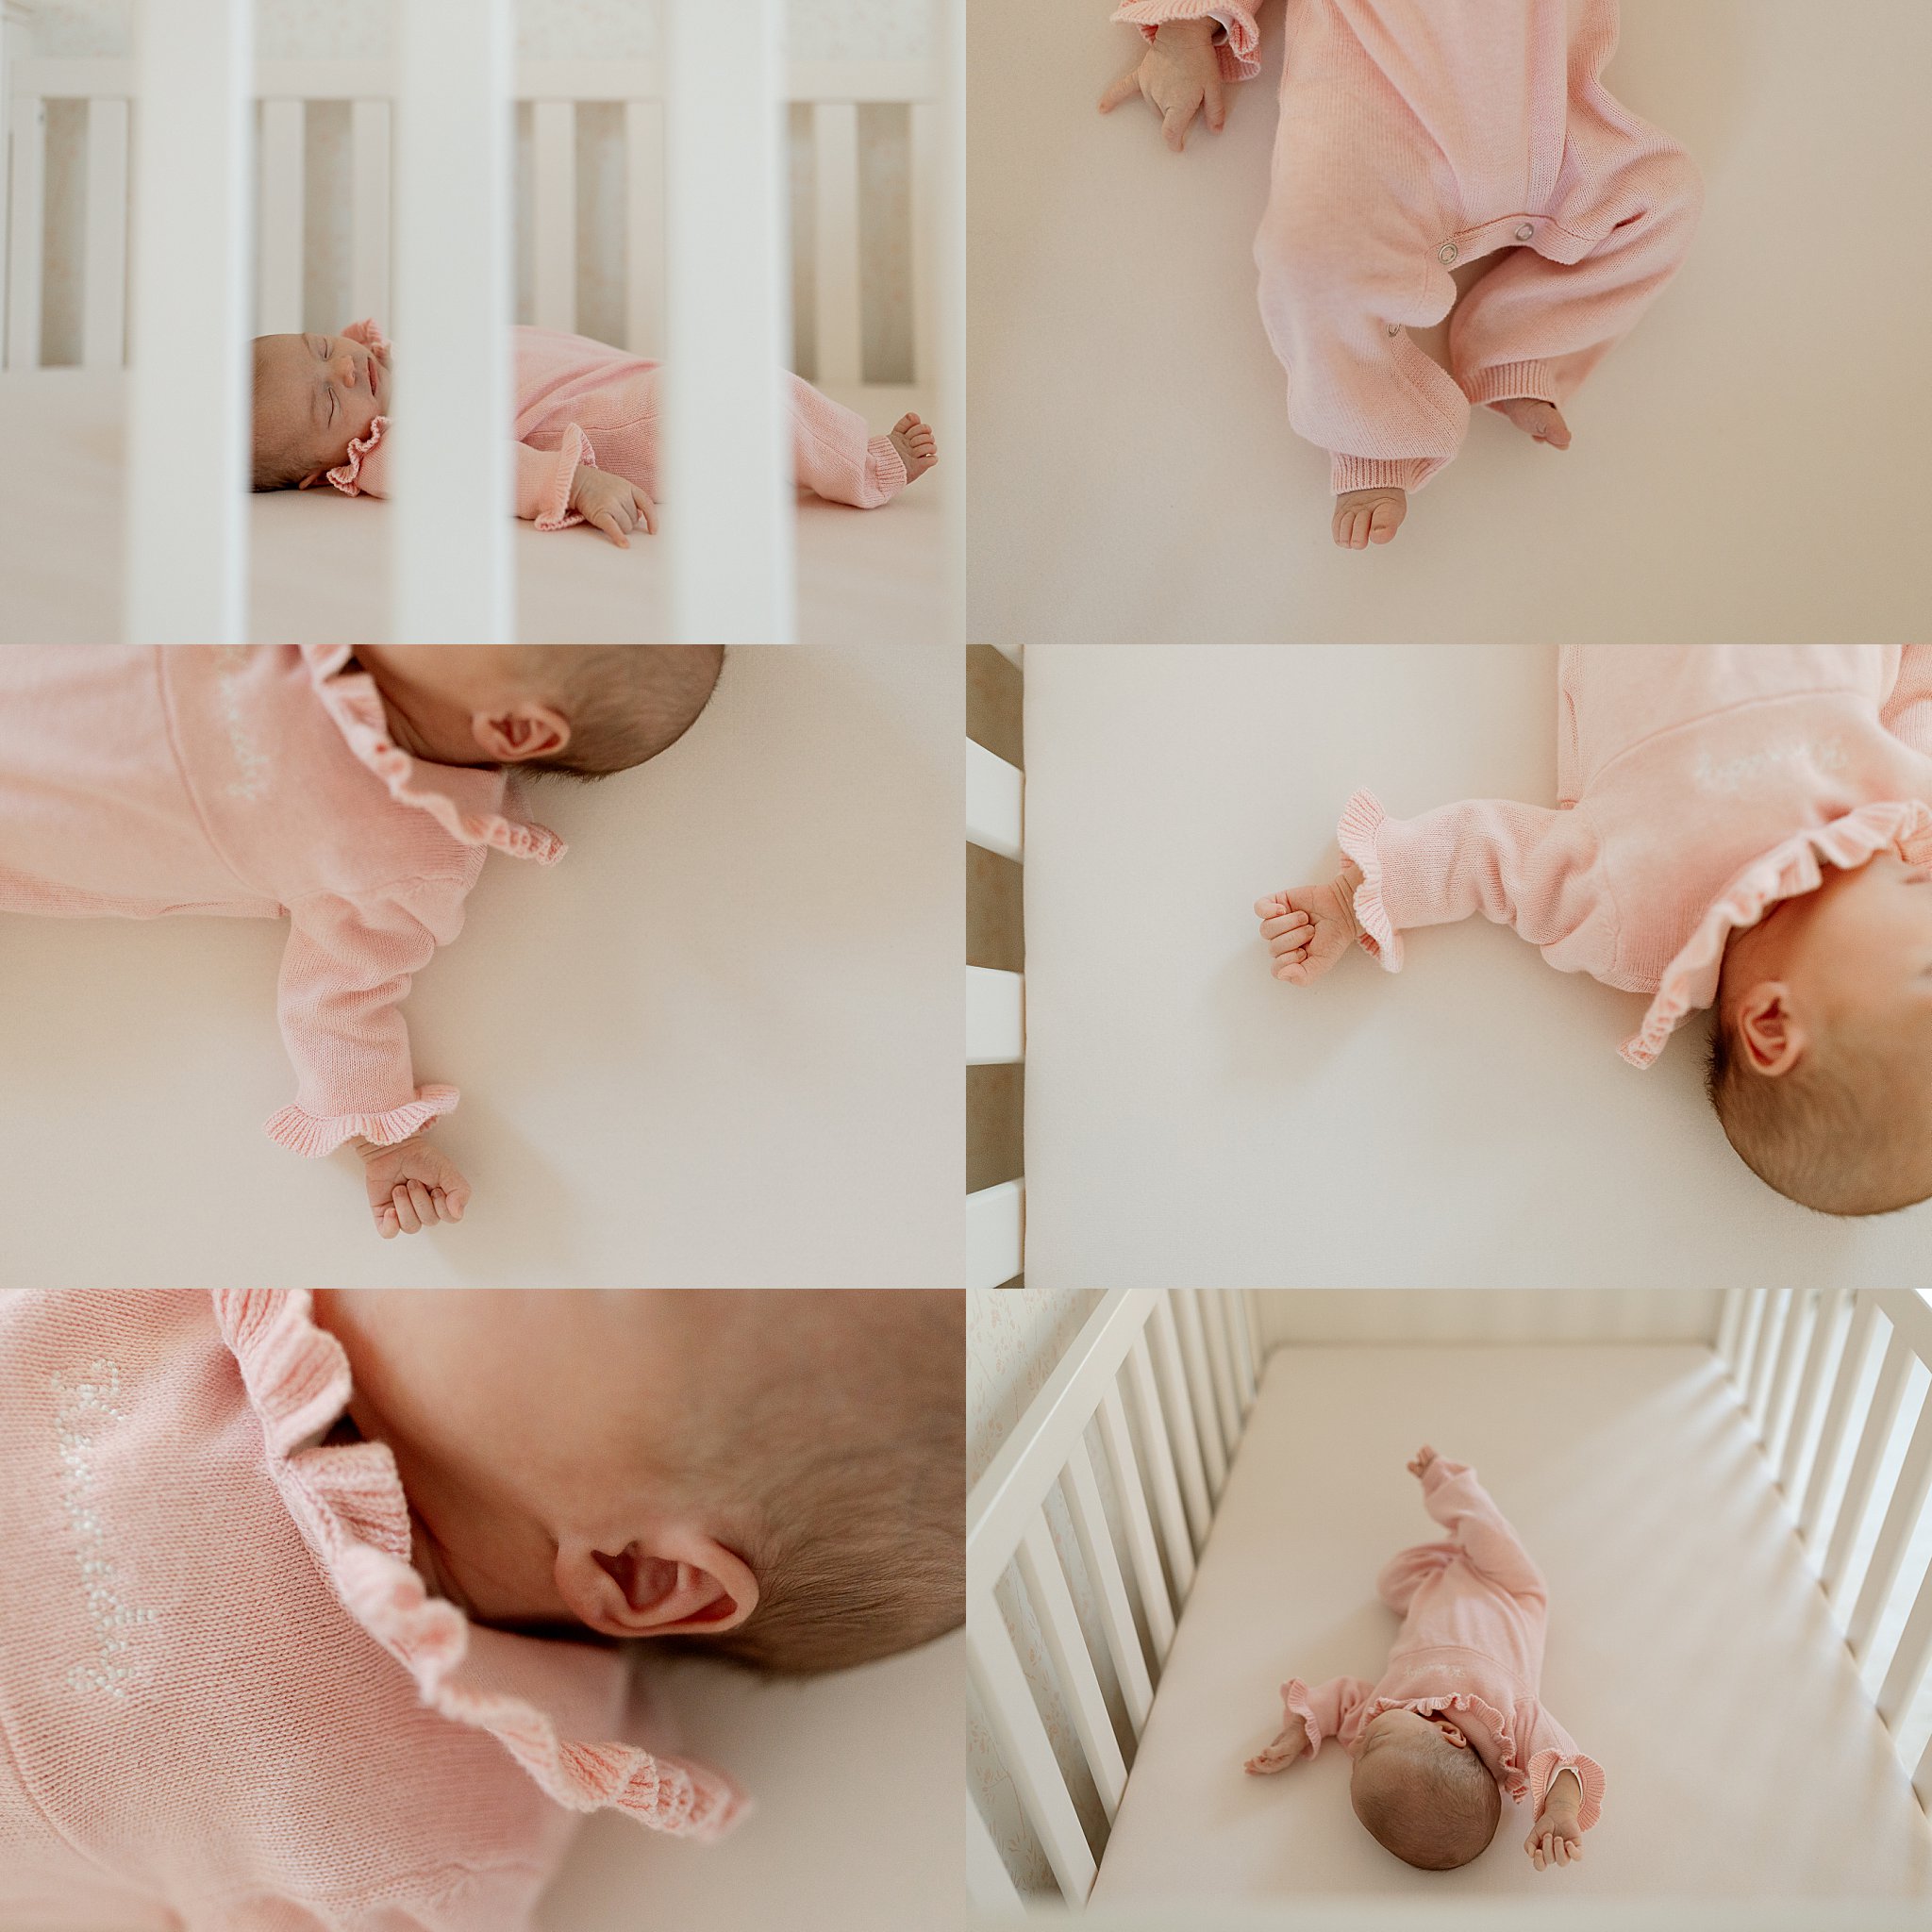 tiny details of baby toes, hands, and ears by Virginia Beach Newborn Photographer